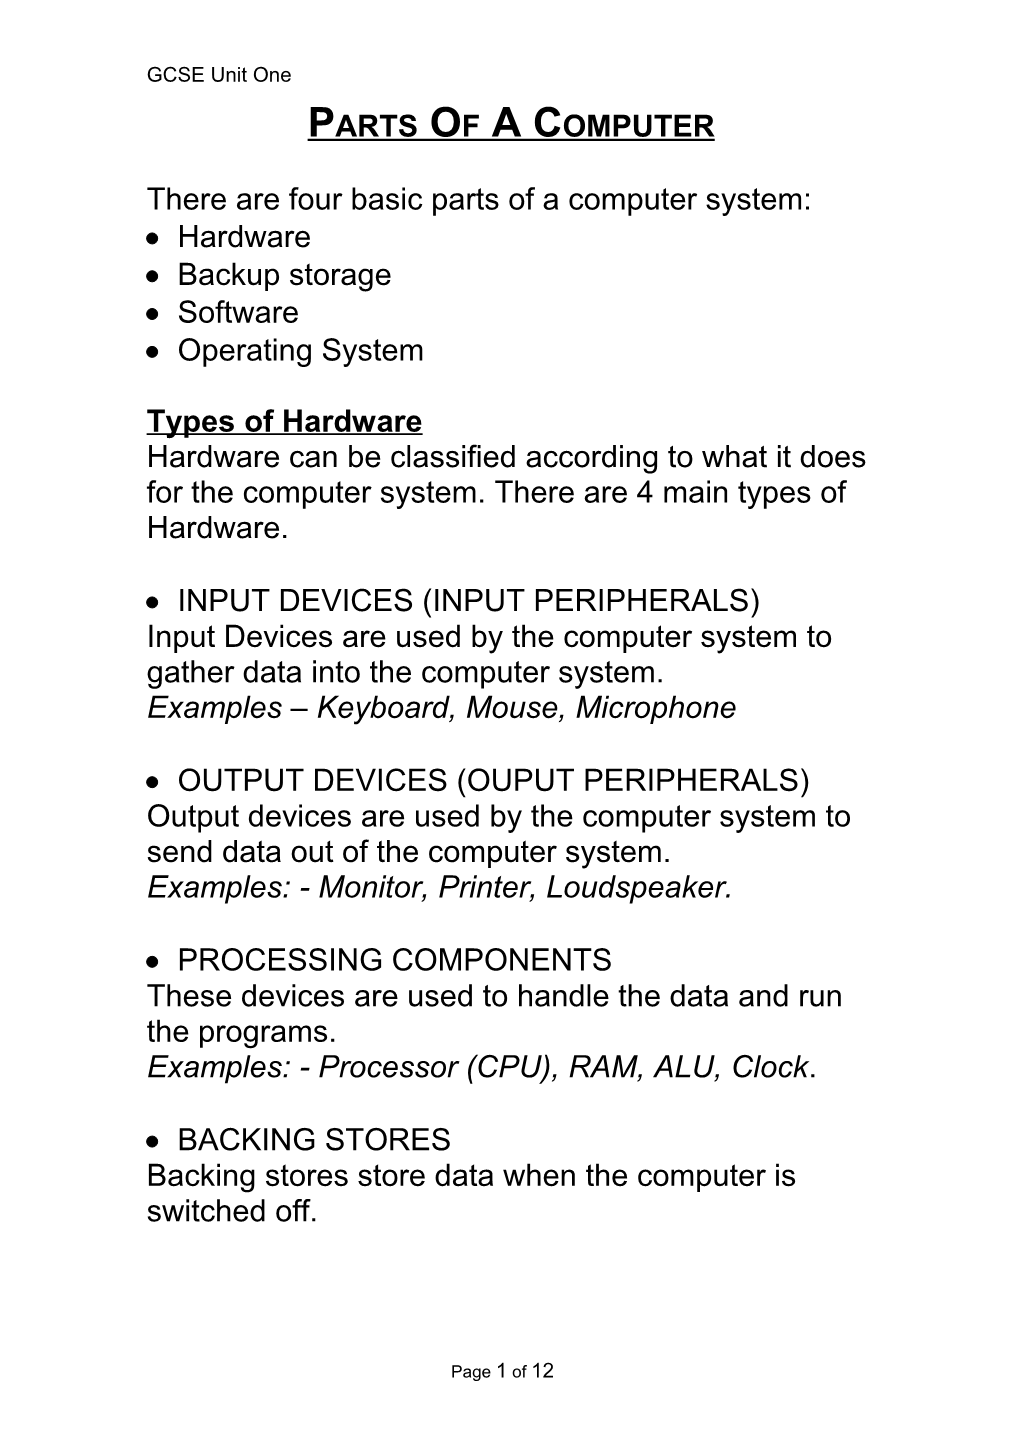 There Are Four Basic Parts of a Computer System